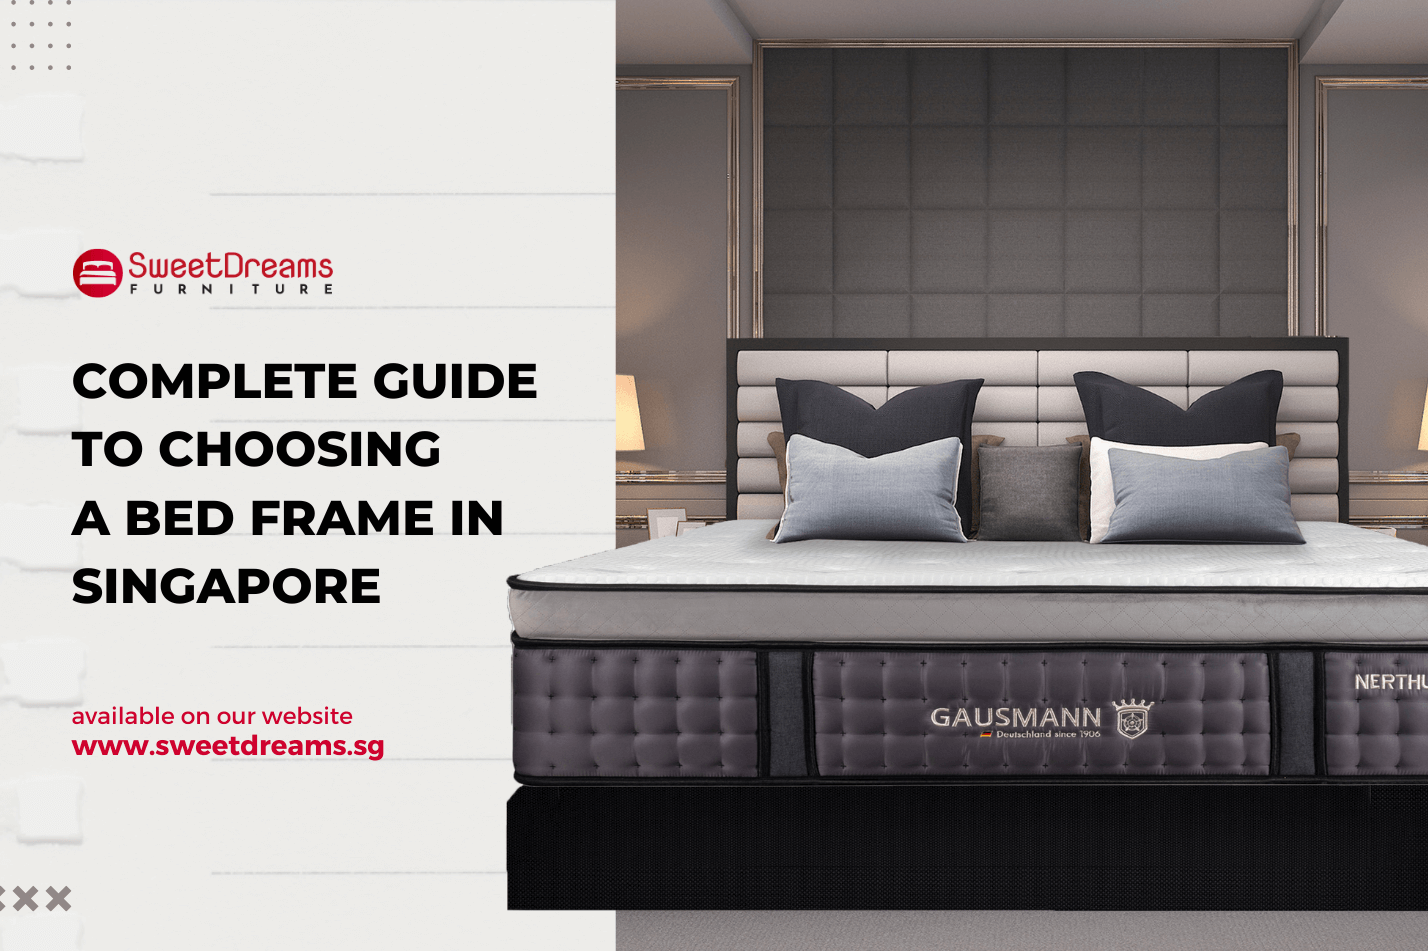 Complete Guide to Choosing a Bed Frame in Singapore